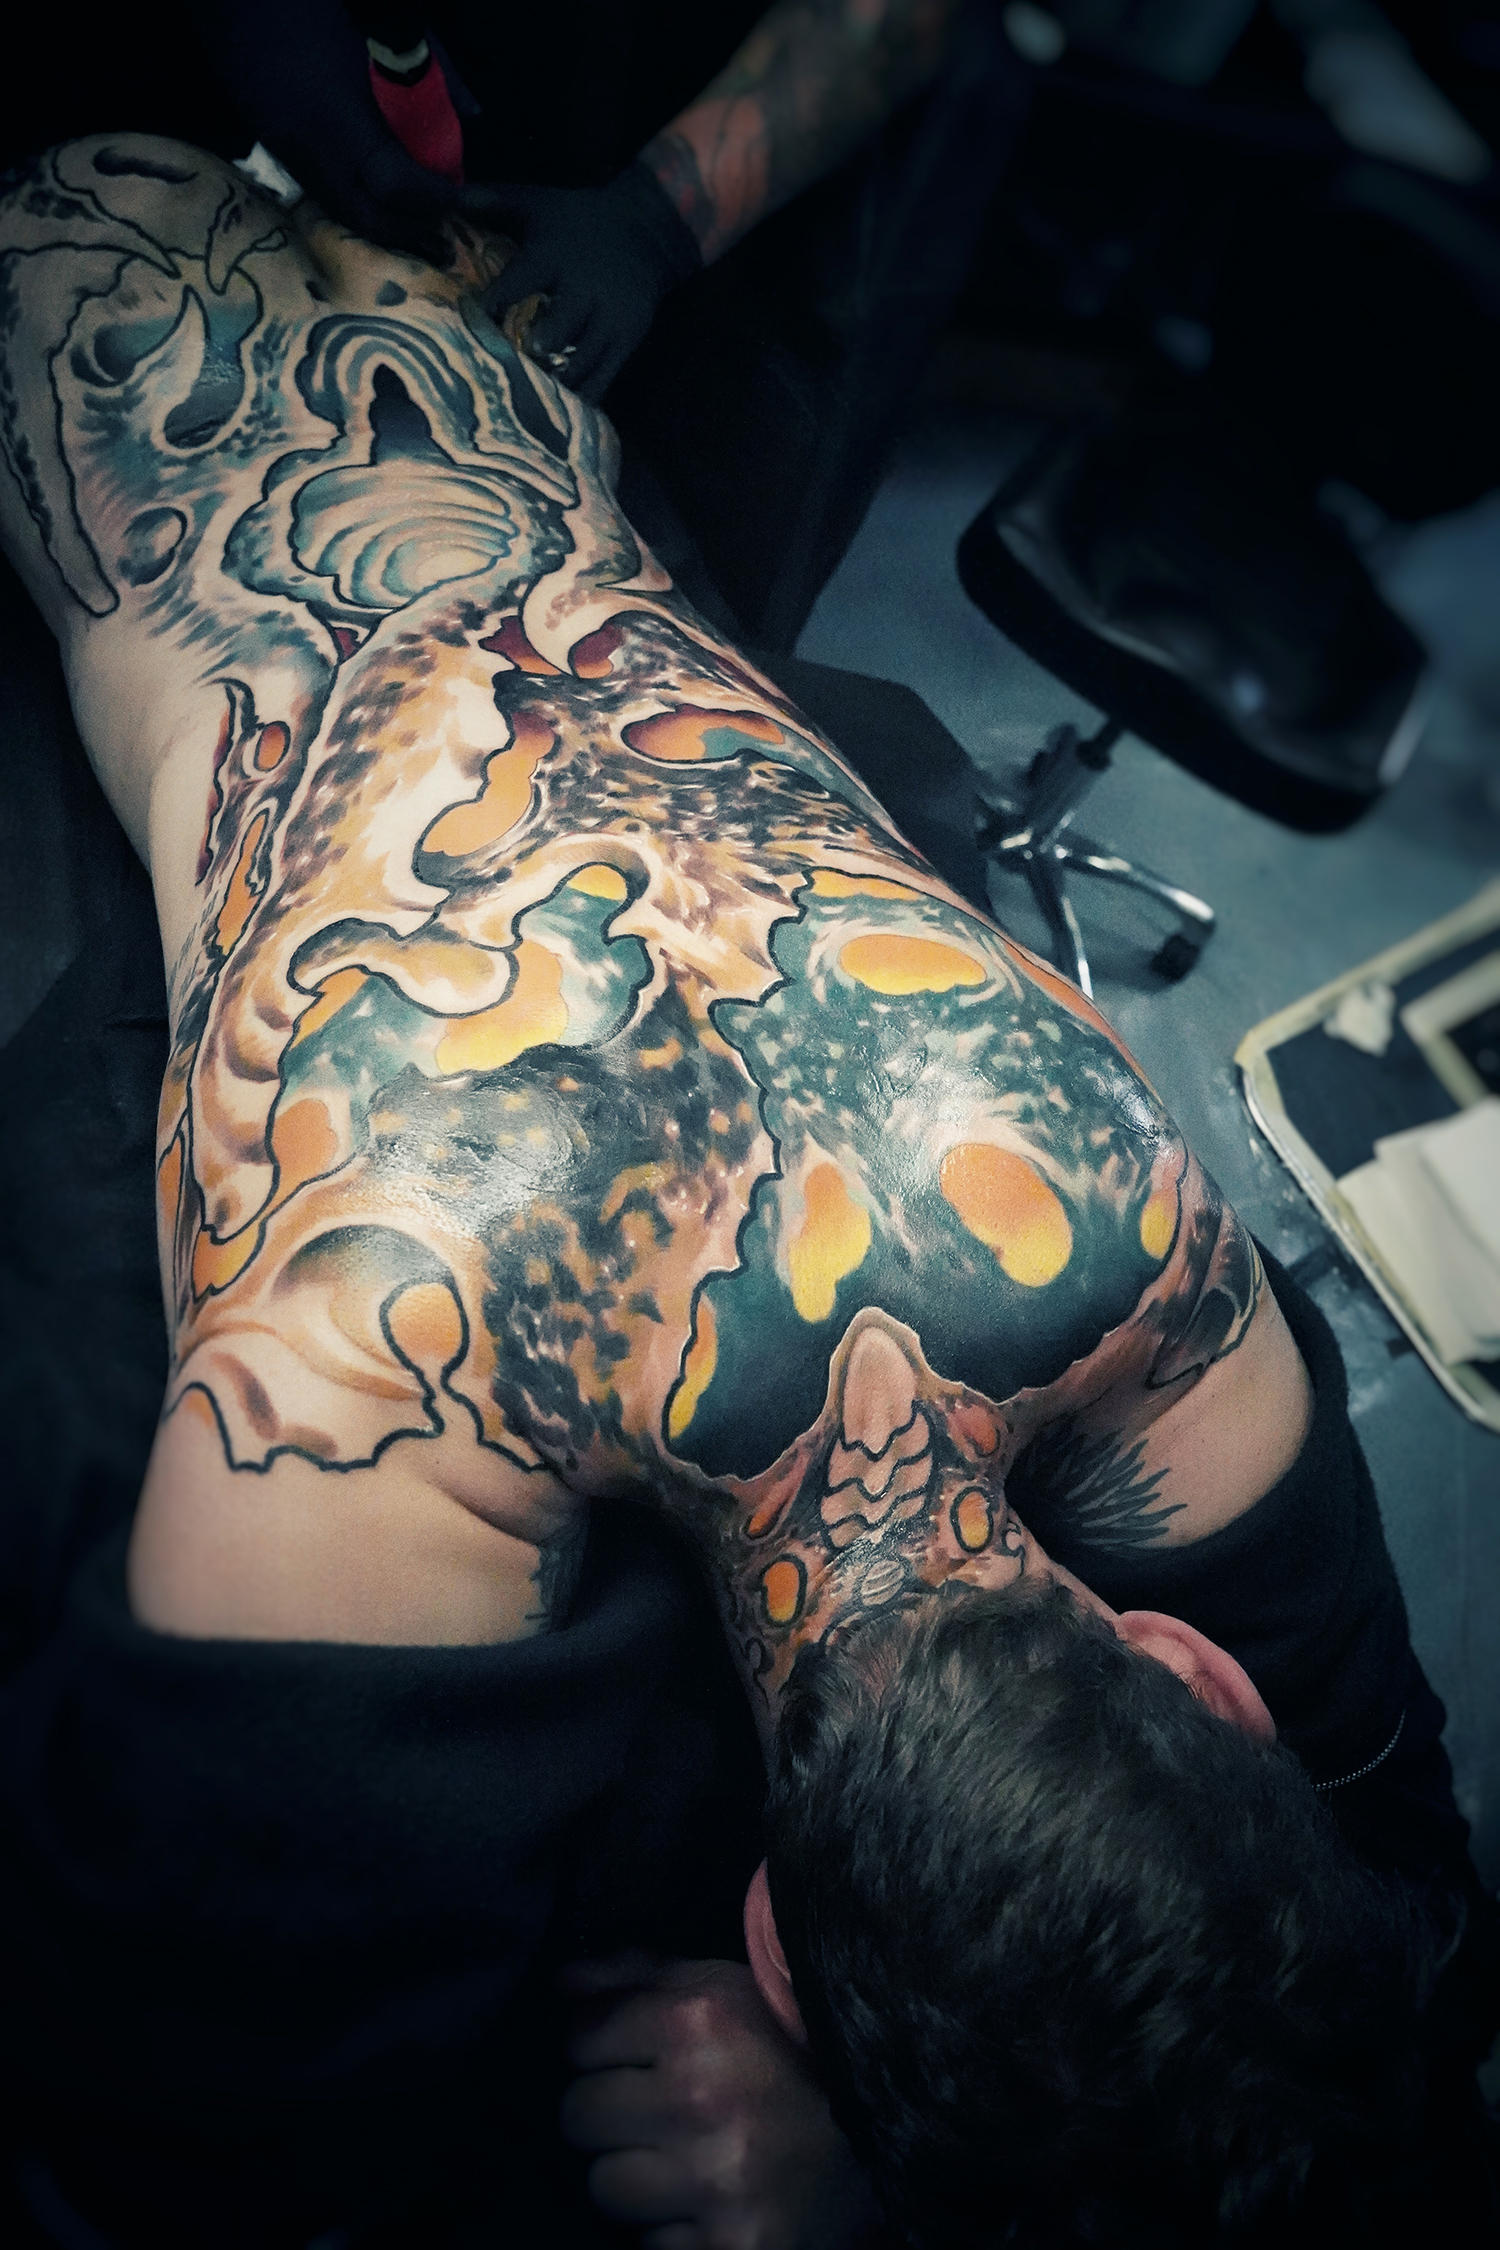 largescale bio-organic back tattoo in color